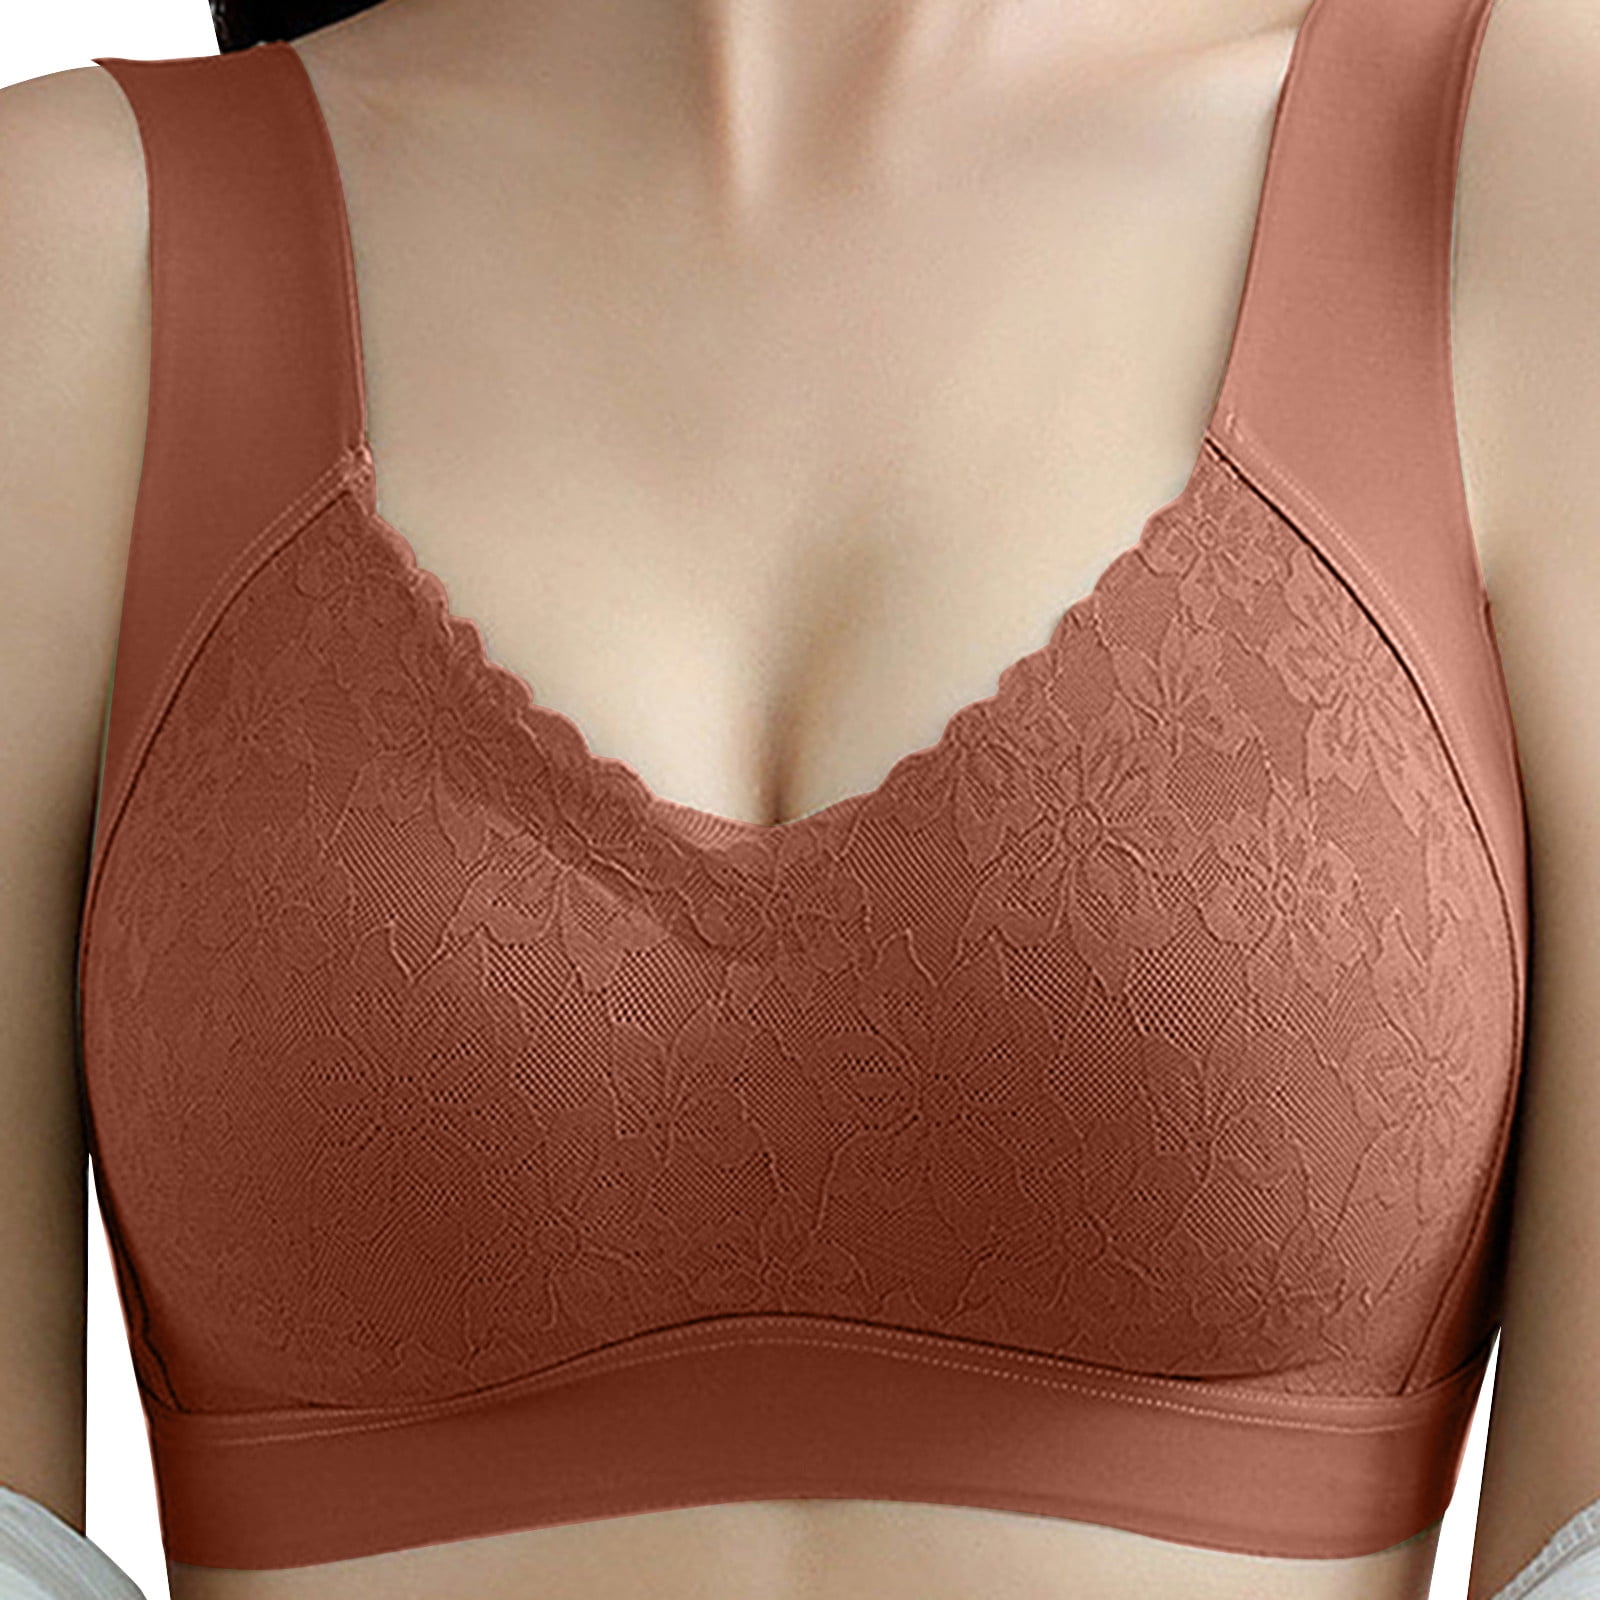 CAICJ98 Women'S Lingerie Beautiful Back Breathable Thin Bras For